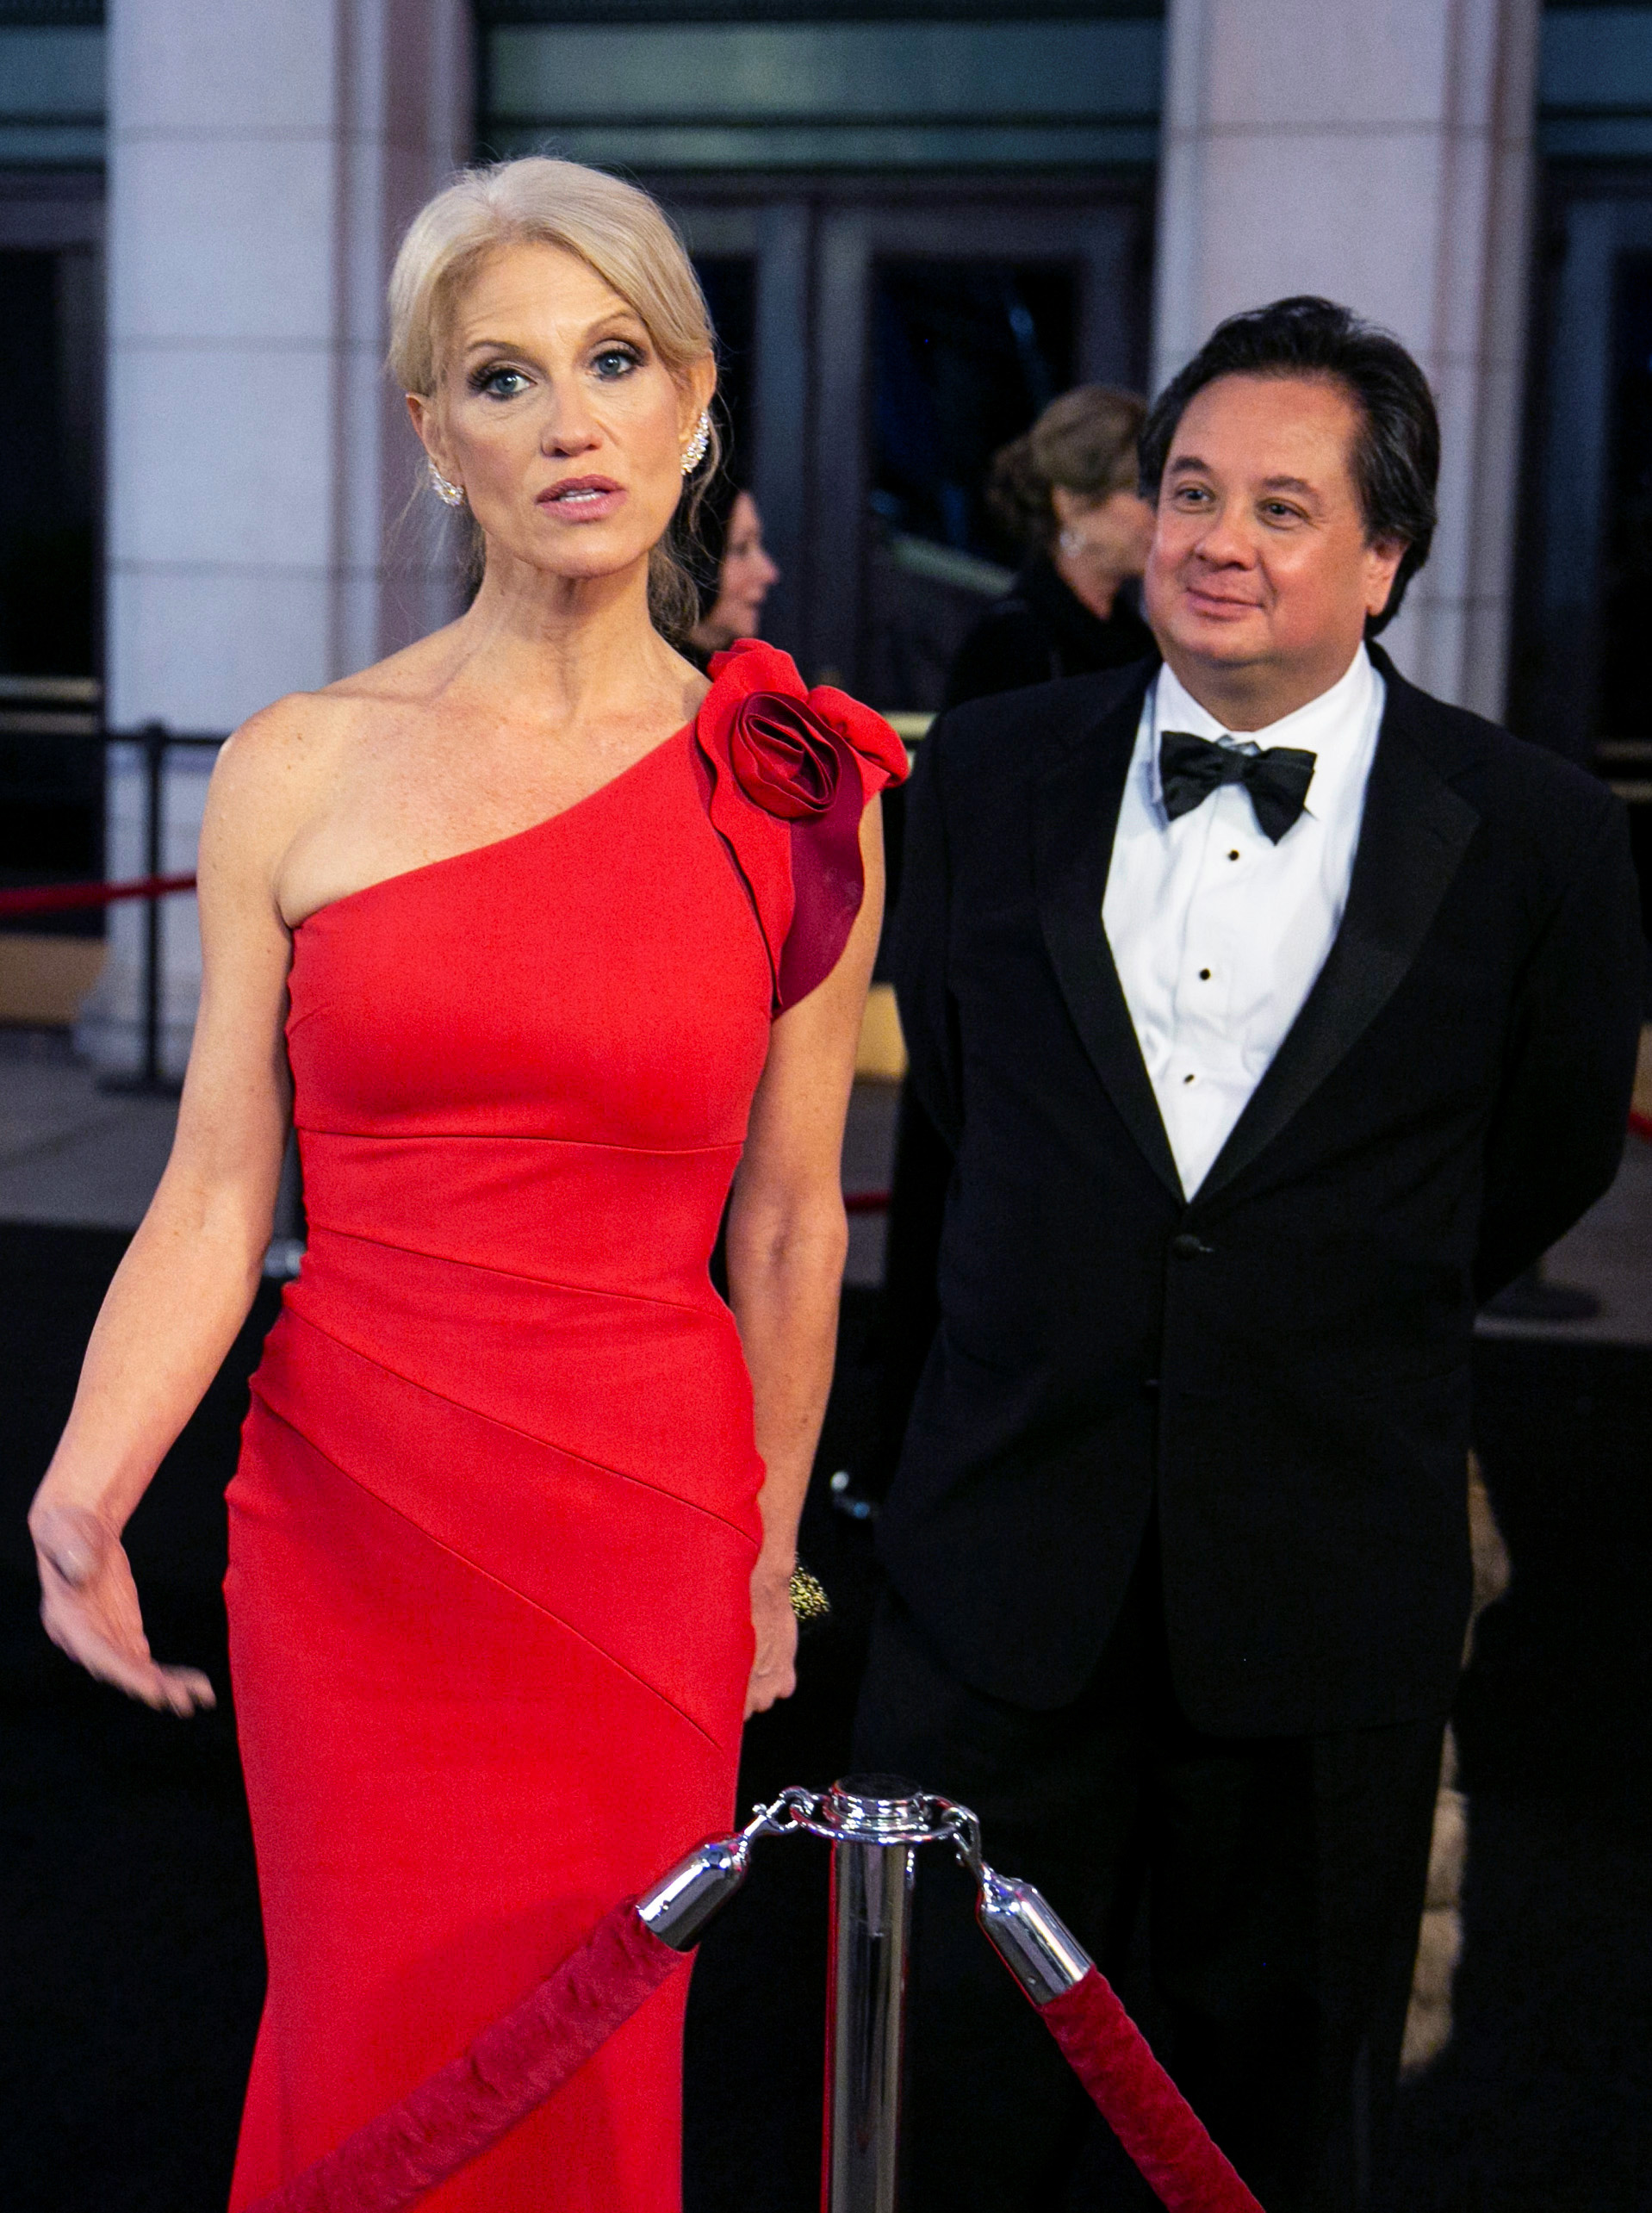 PHOTO: White House Counselor Kellyanne Conway and her husband George Conway arrive for a dinner at Union Station on the eve of the 58th presidential inauguration in Washington, D.C., Jan. 19, 2017.